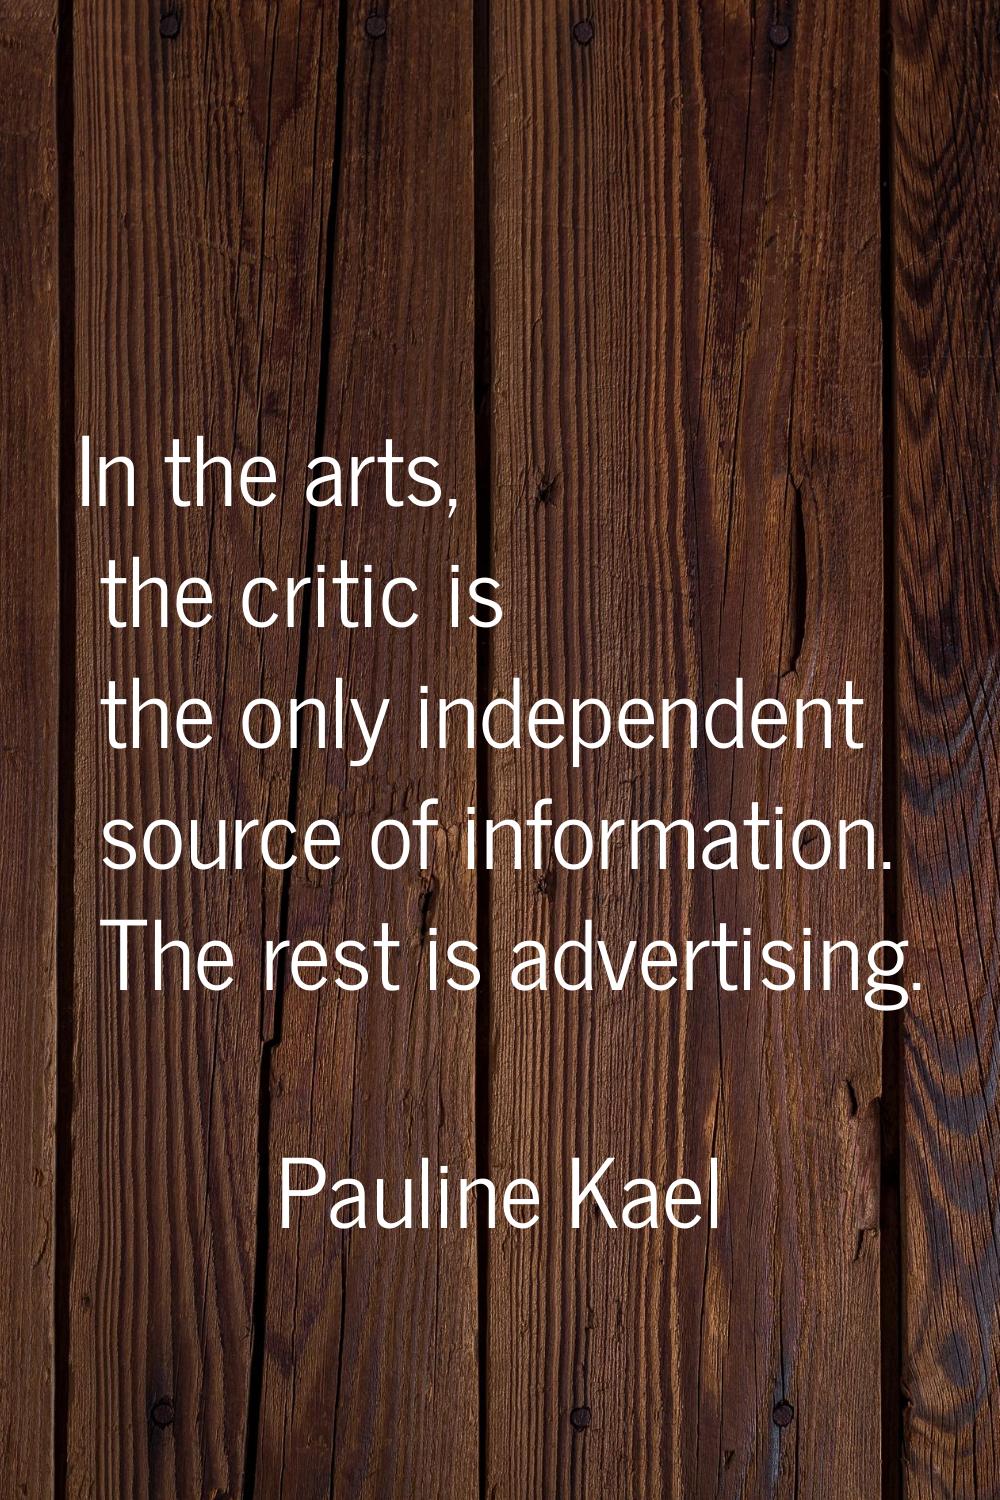 In the arts, the critic is the only independent source of information. The rest is advertising.